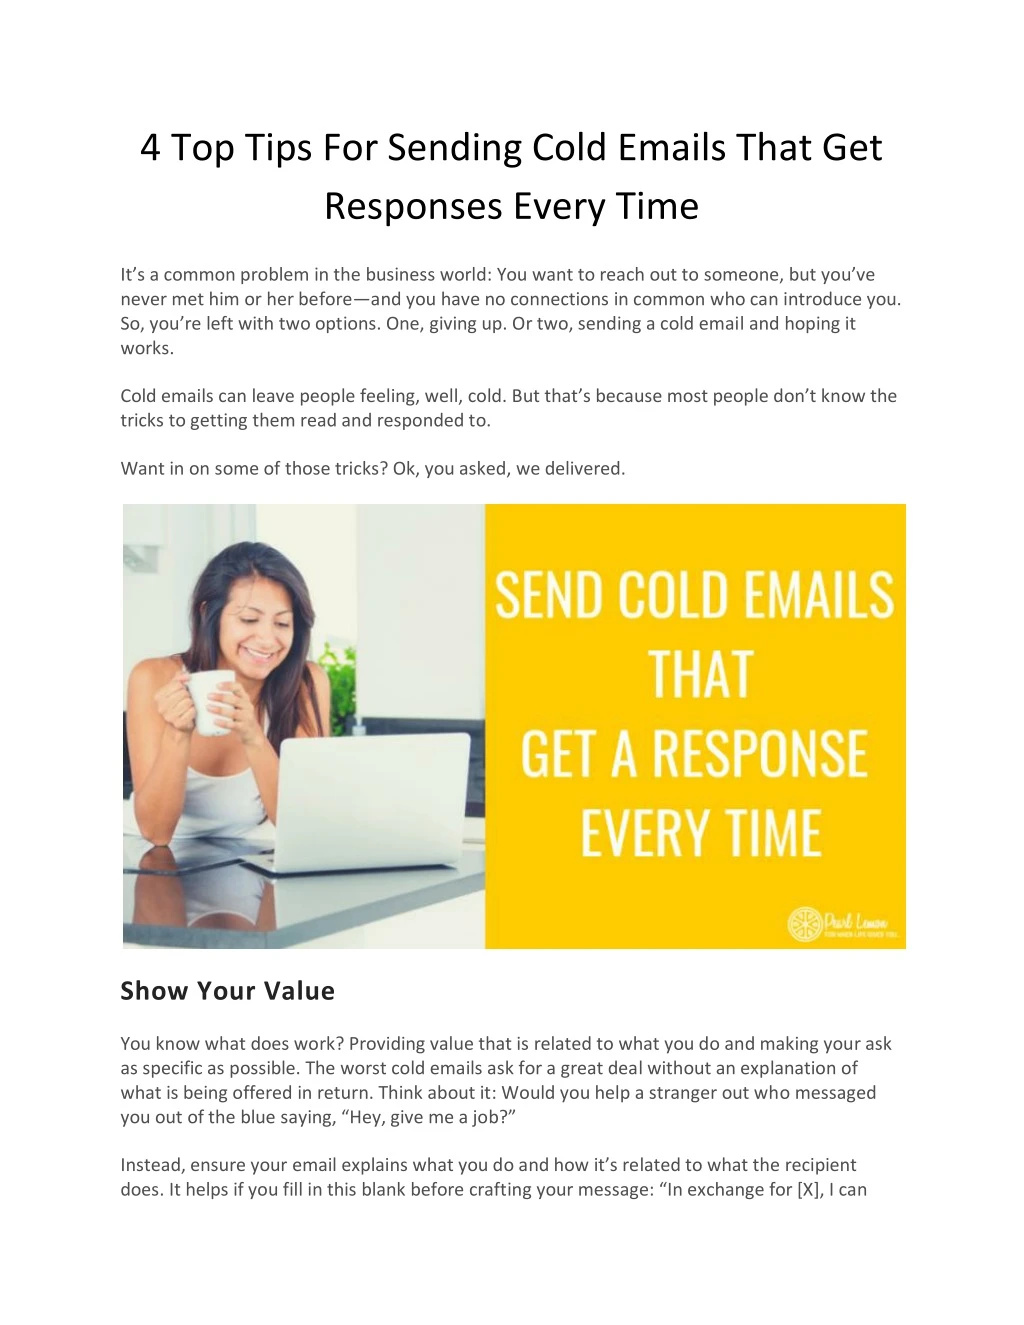 4 top tips for sending cold emails that